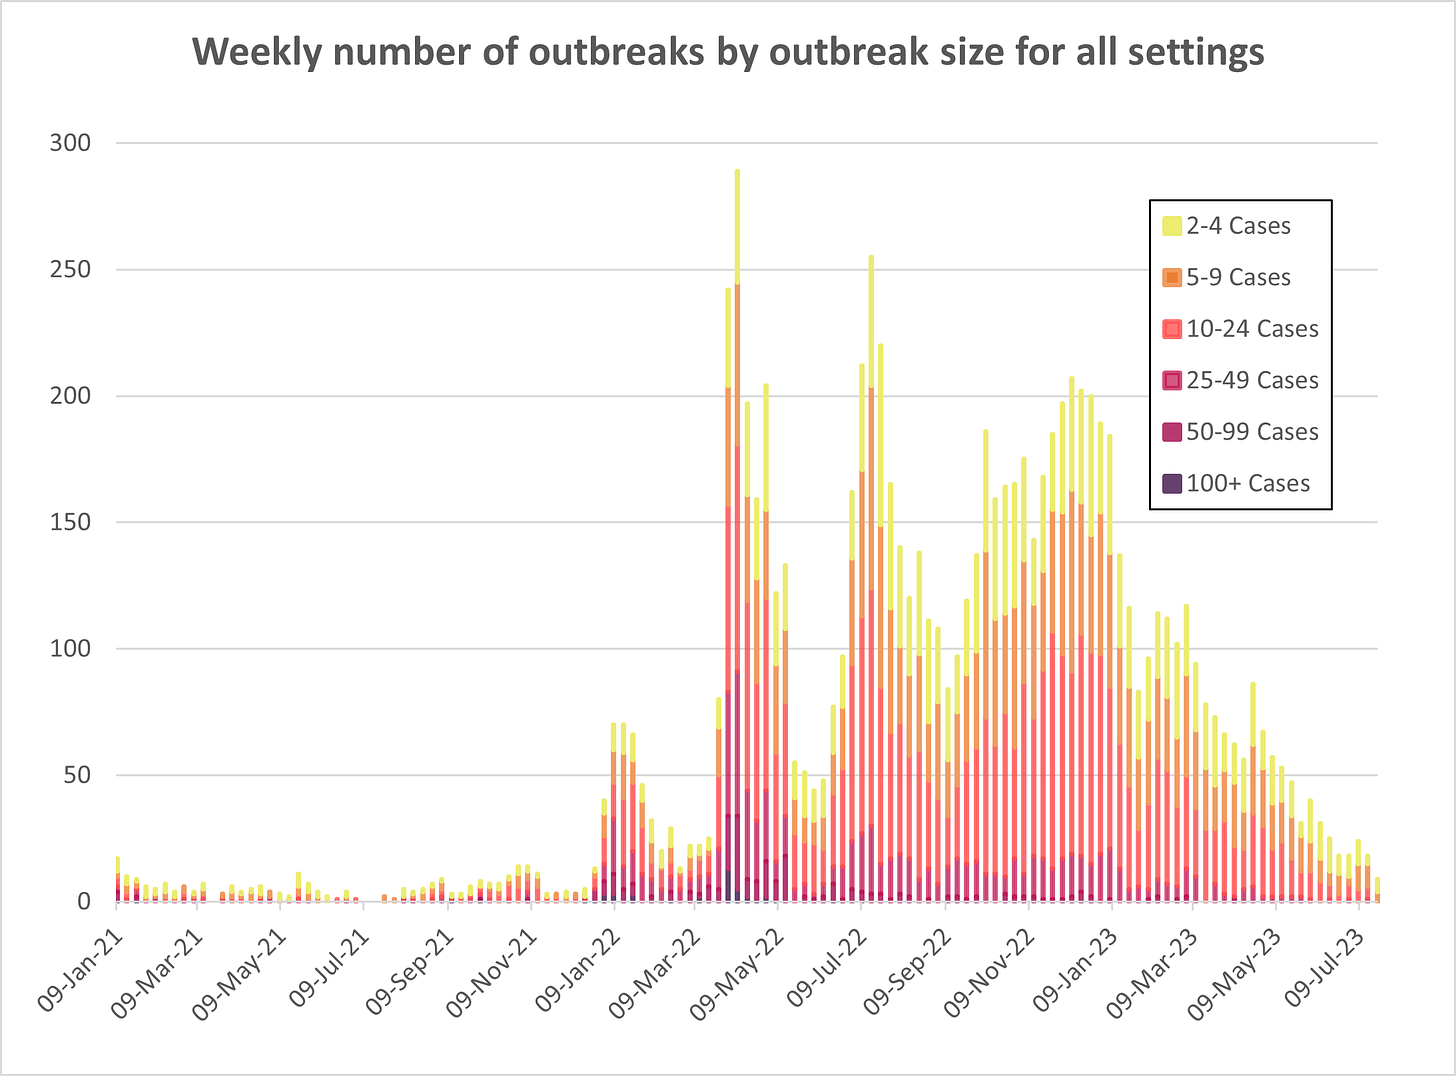 Stacked bar chart of weekly outbreaks by outbreak size (2-4 cases, 5-9 cases, 10-24 cases, 25-49 cases, 50-99 cases, 100+ cases) in Canada from January 9th, 2021 to July 9th, 2023. There are fewer than 25 outbreaks every week until January 1st, 2022. They spike to around 70 in January 2022, around 300 in April 2022, around 250 in Summer 2022, fluctuate from 150-200 from October 2022 to January 2023, from 50-100 until May 2023, then decrease to around 25.